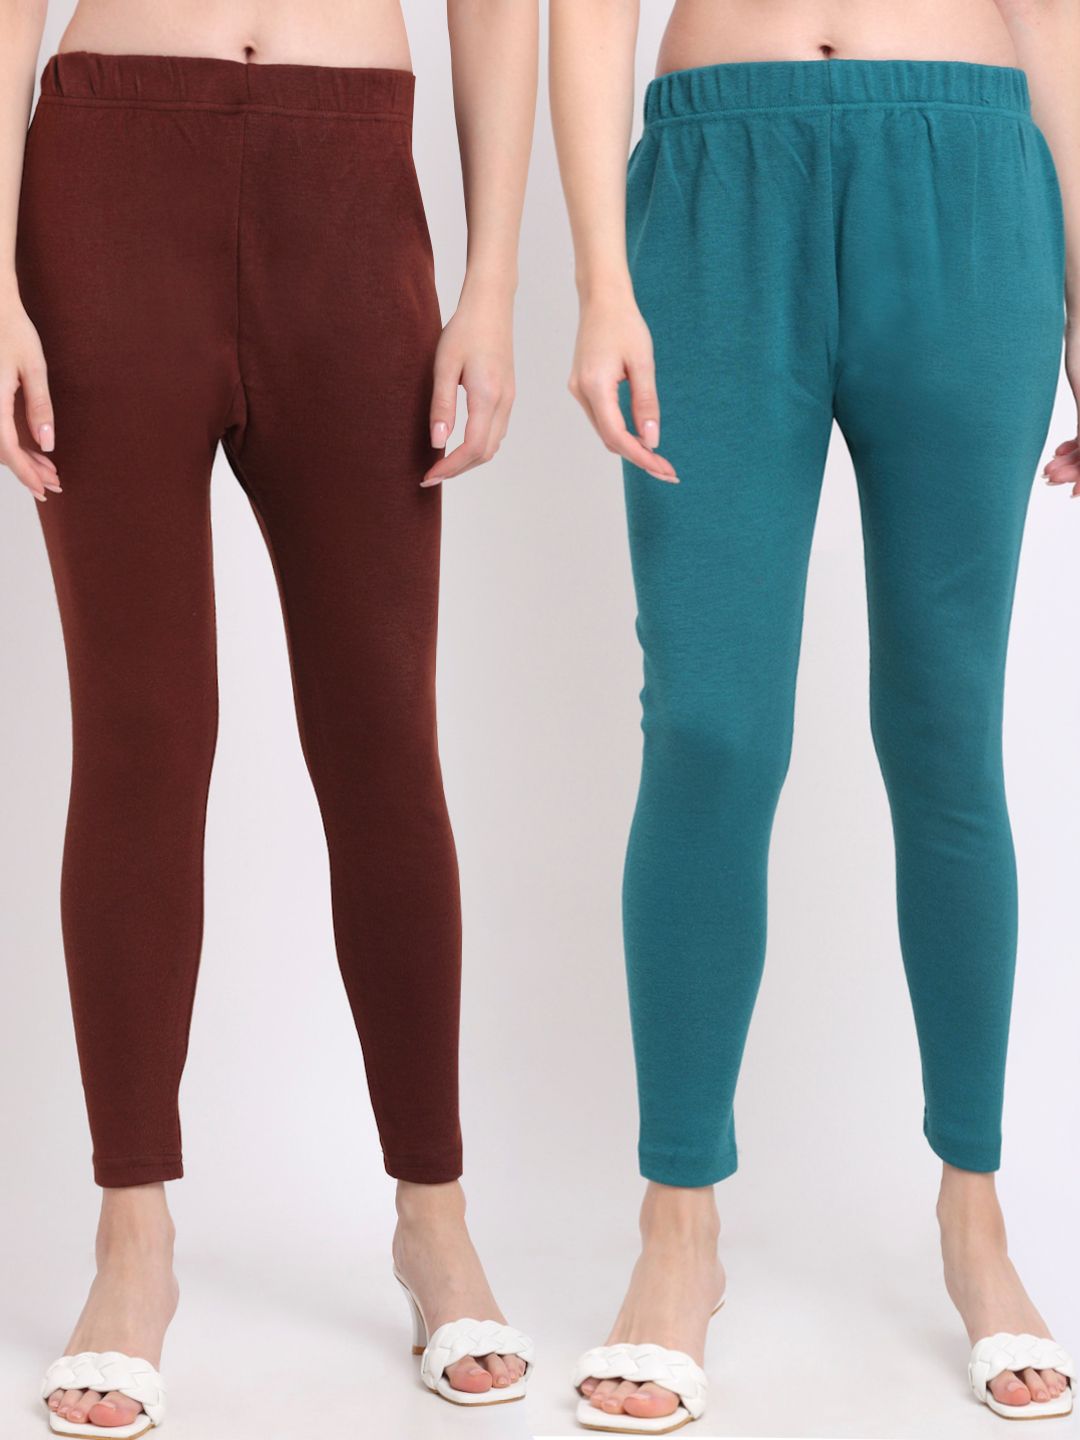 TAG 7 Women Multi Pack Of 2 Solid Ankle-Length Leggings Price in India